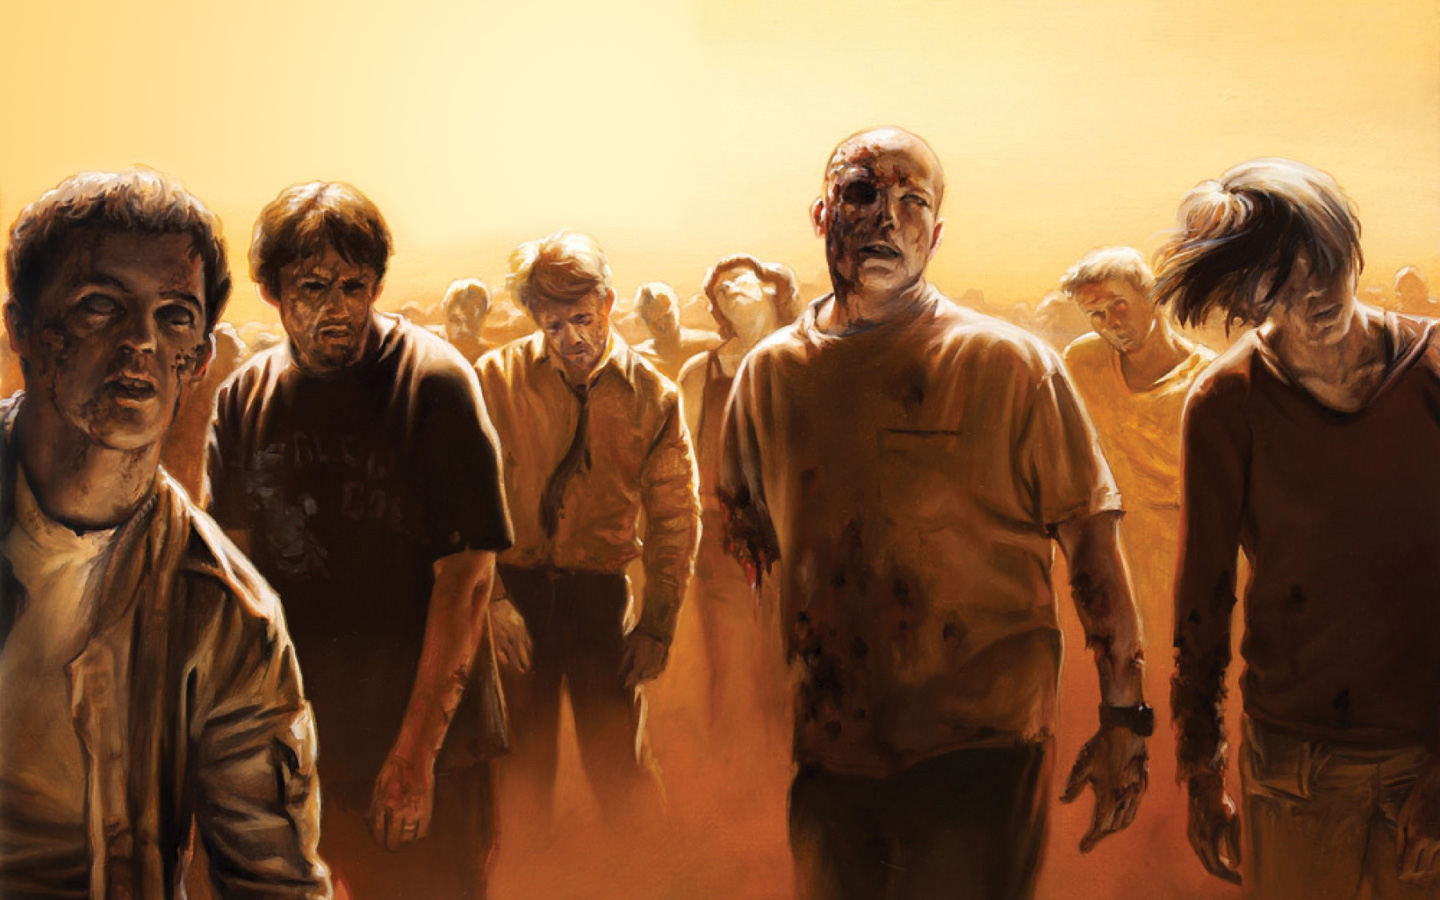 All Set For Zombie Apocalypse? Do The Math to Survive